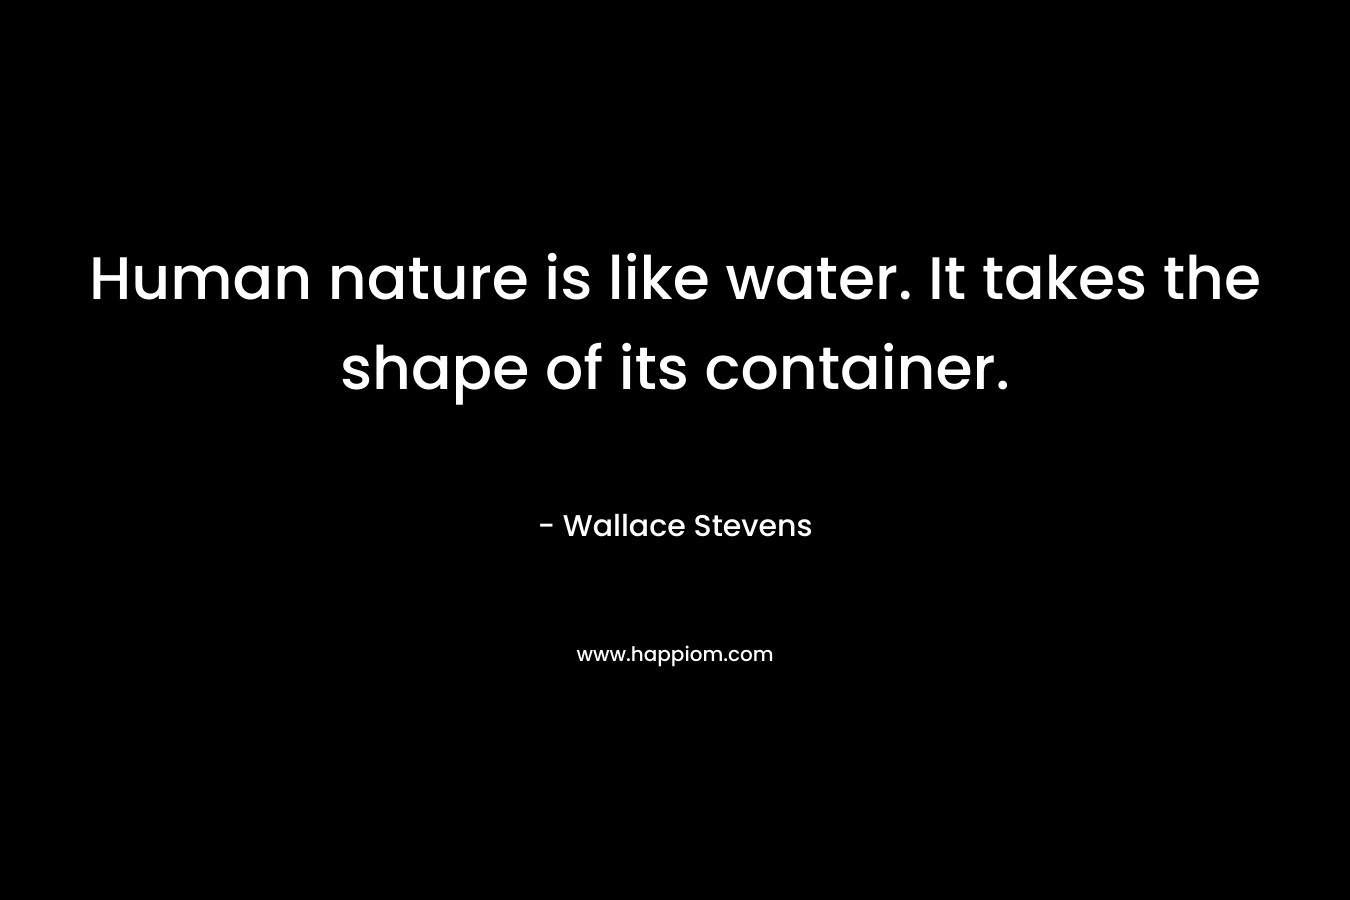 Human nature is like water. It takes the shape of its container. – Wallace Stevens